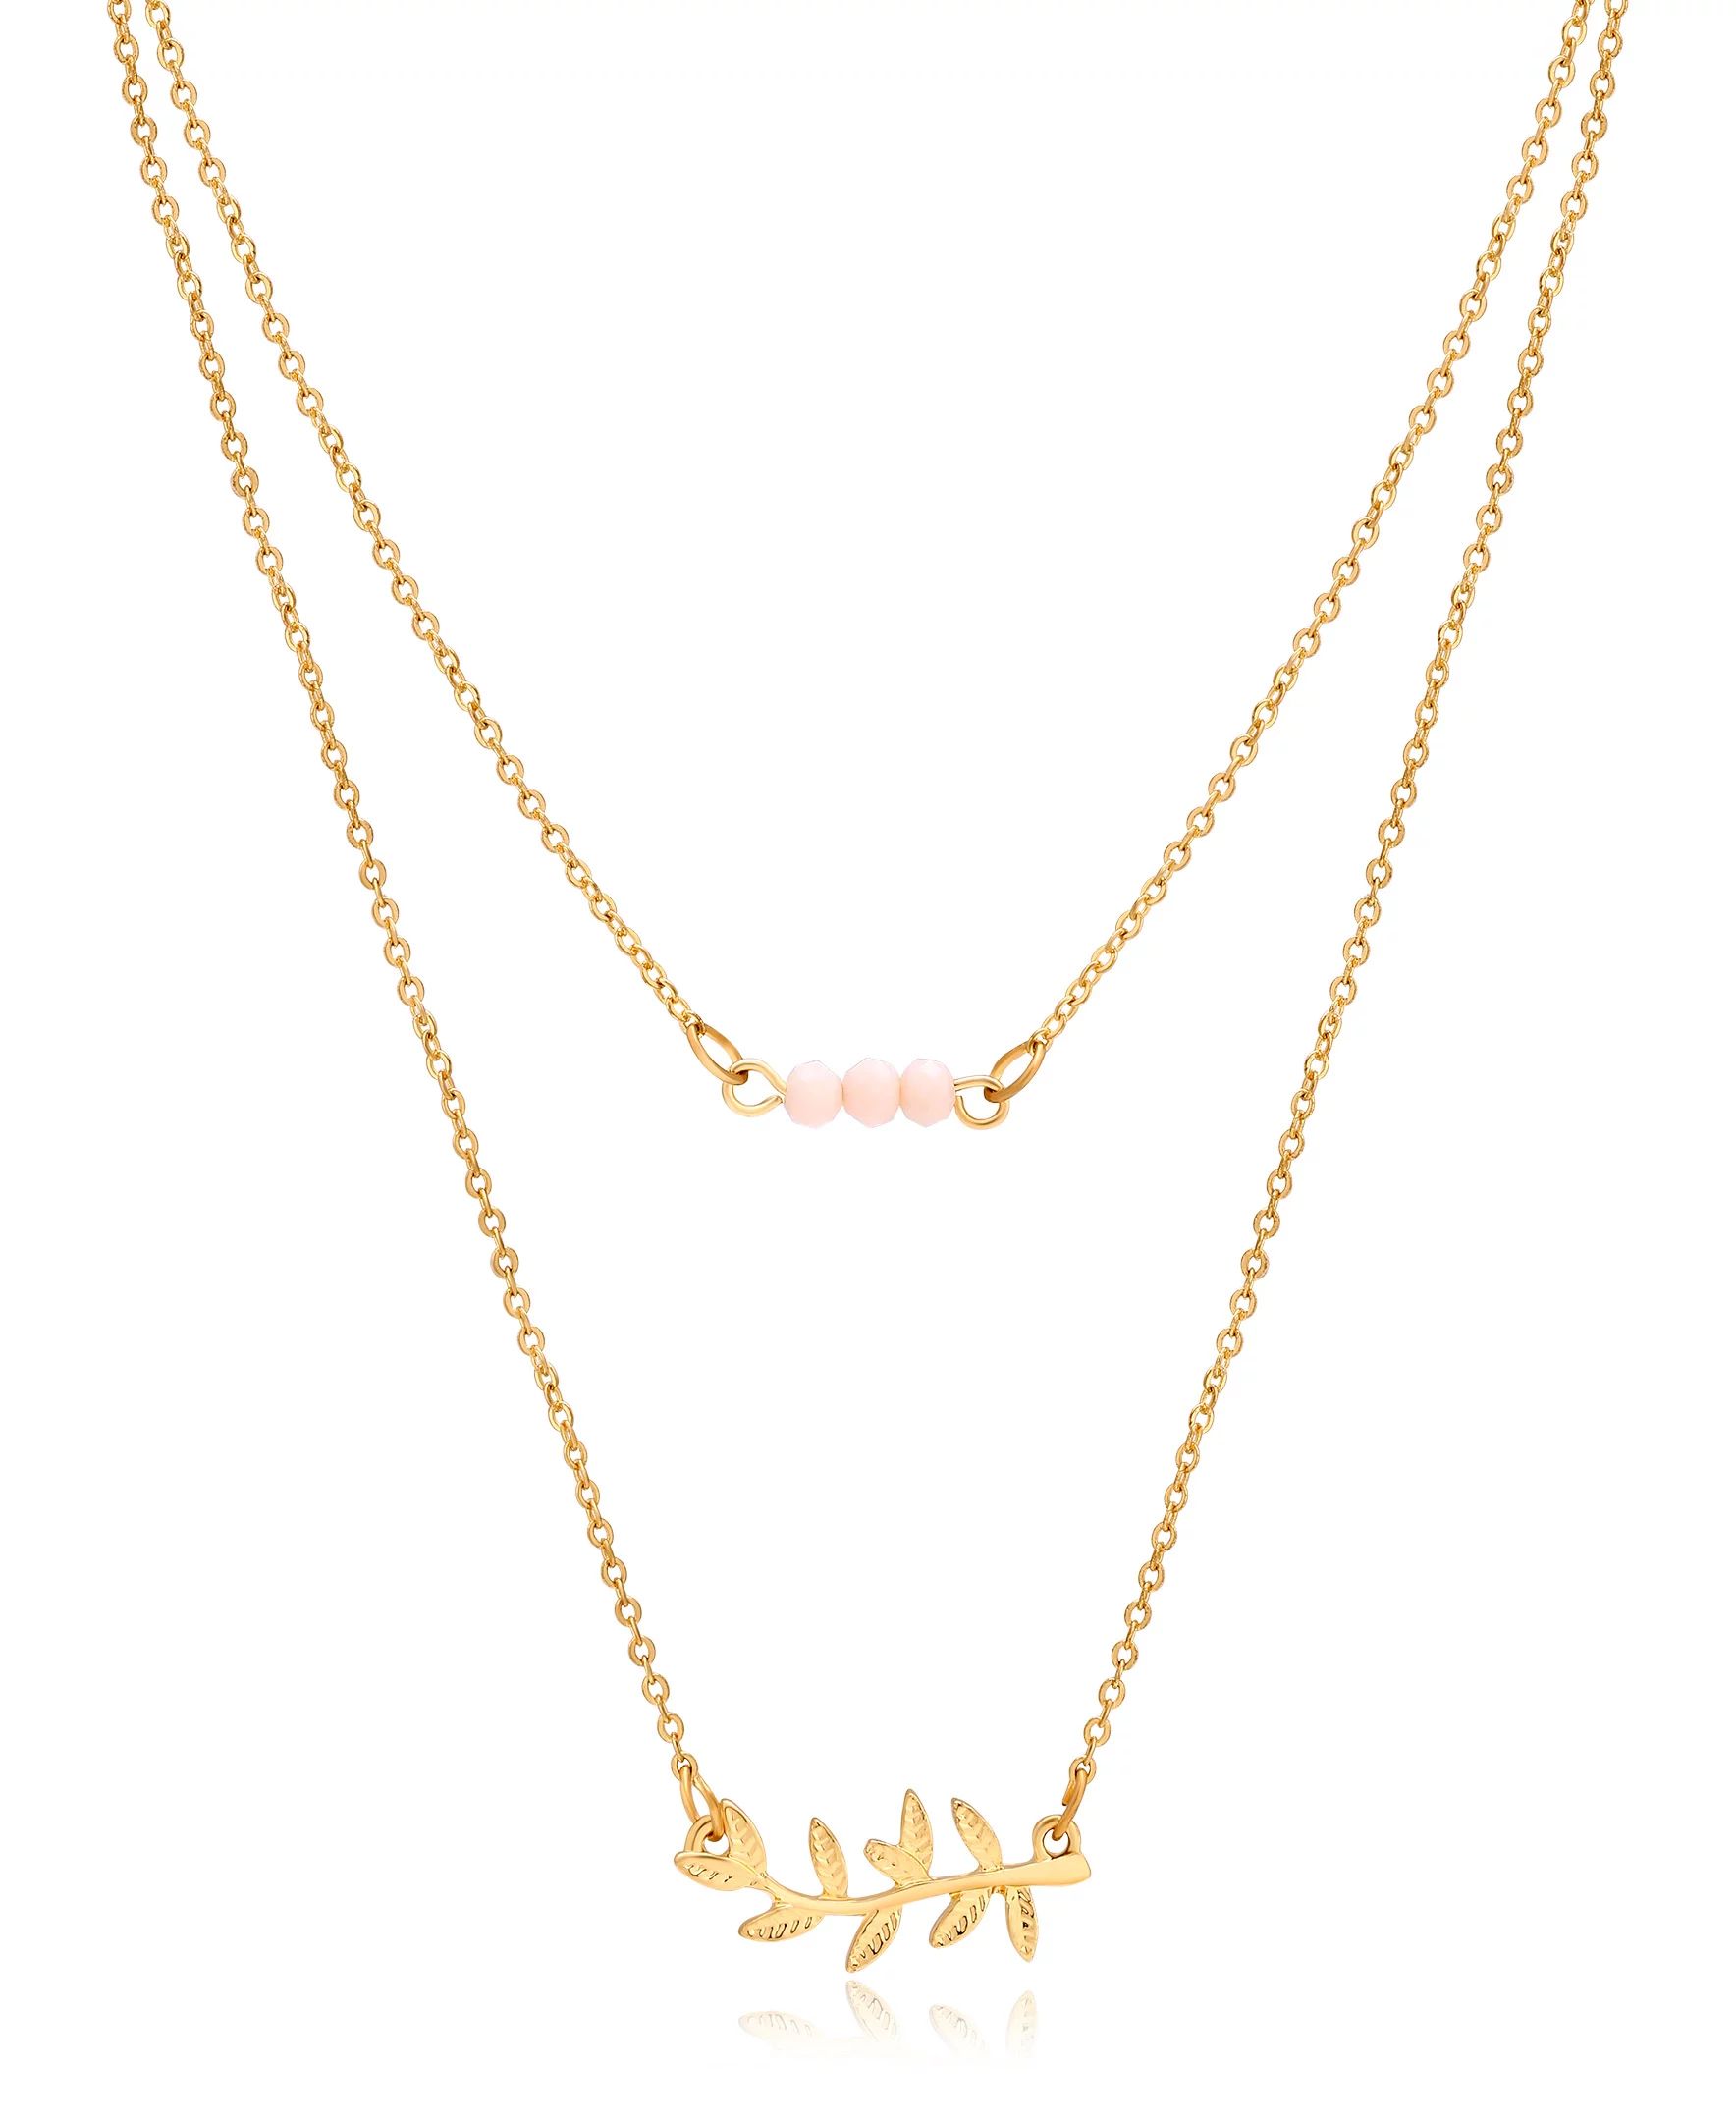 Duo Time and Tru Women's Imitation Gold Layered Glass Bead and Leaf Necklaces. | Walmart (US)